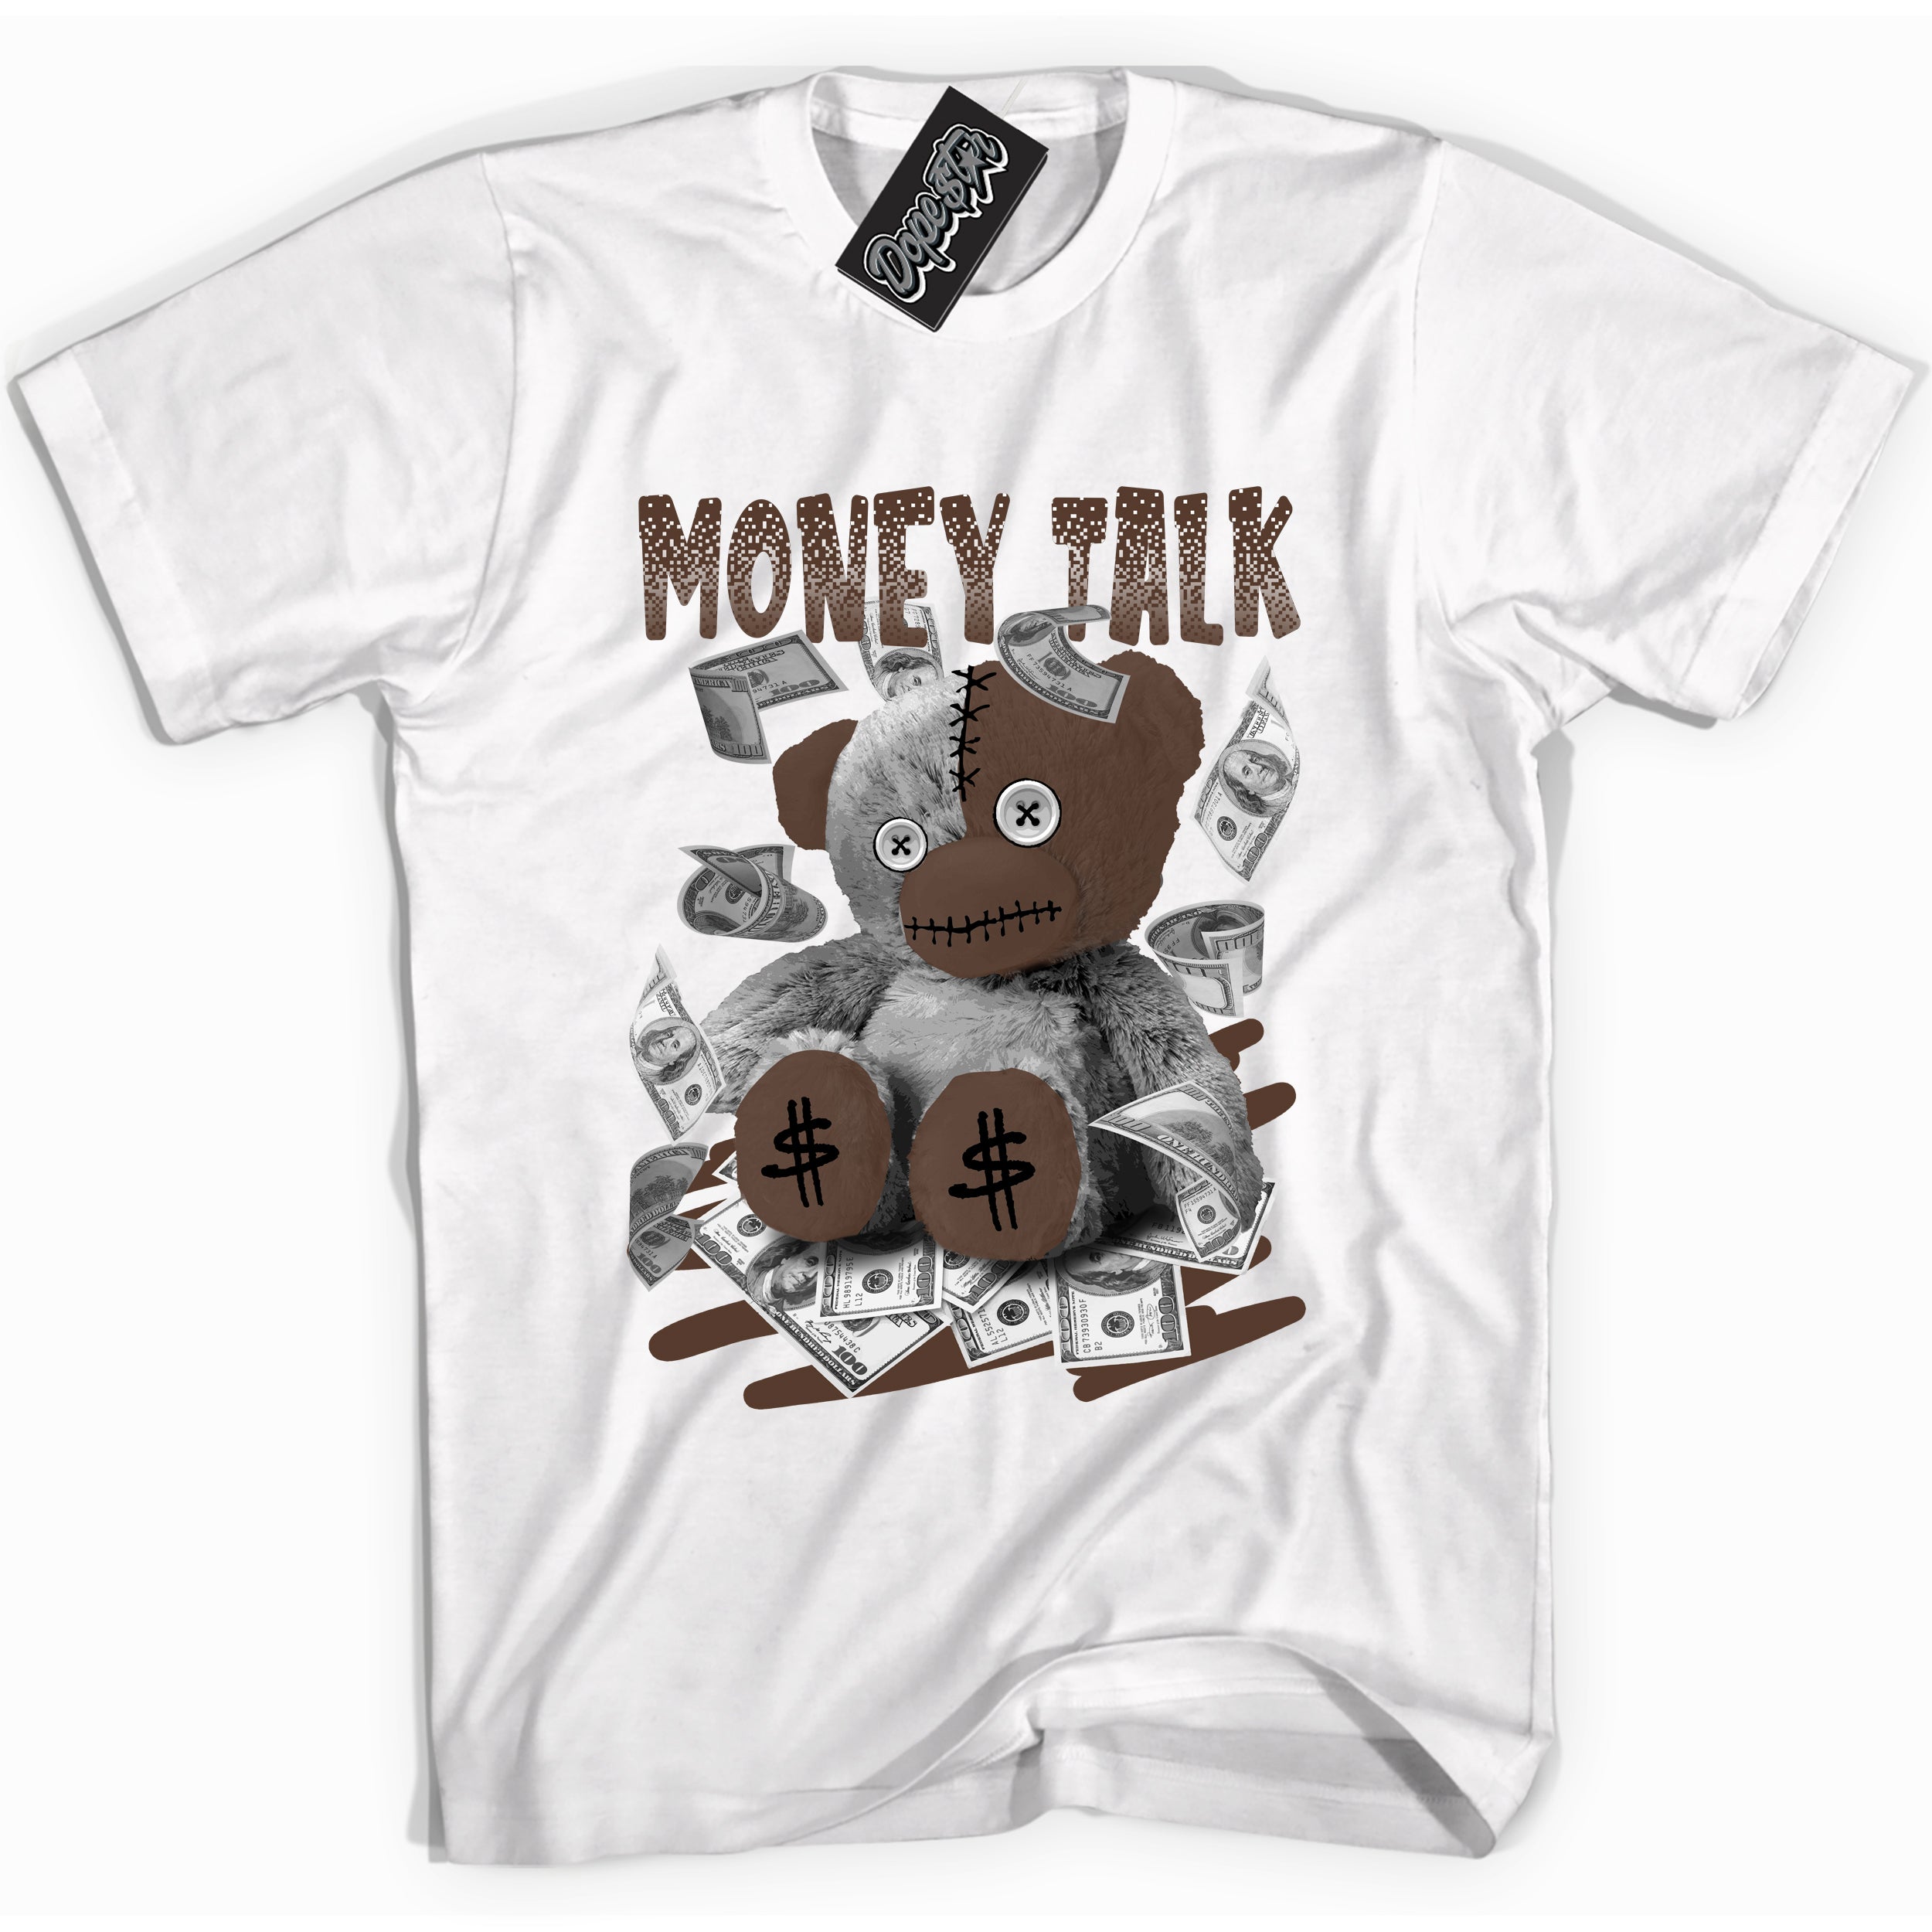 Cool White graphic tee with “ Money Talk Bear ” design, that perfectly matches Palomino 1s sneakers 